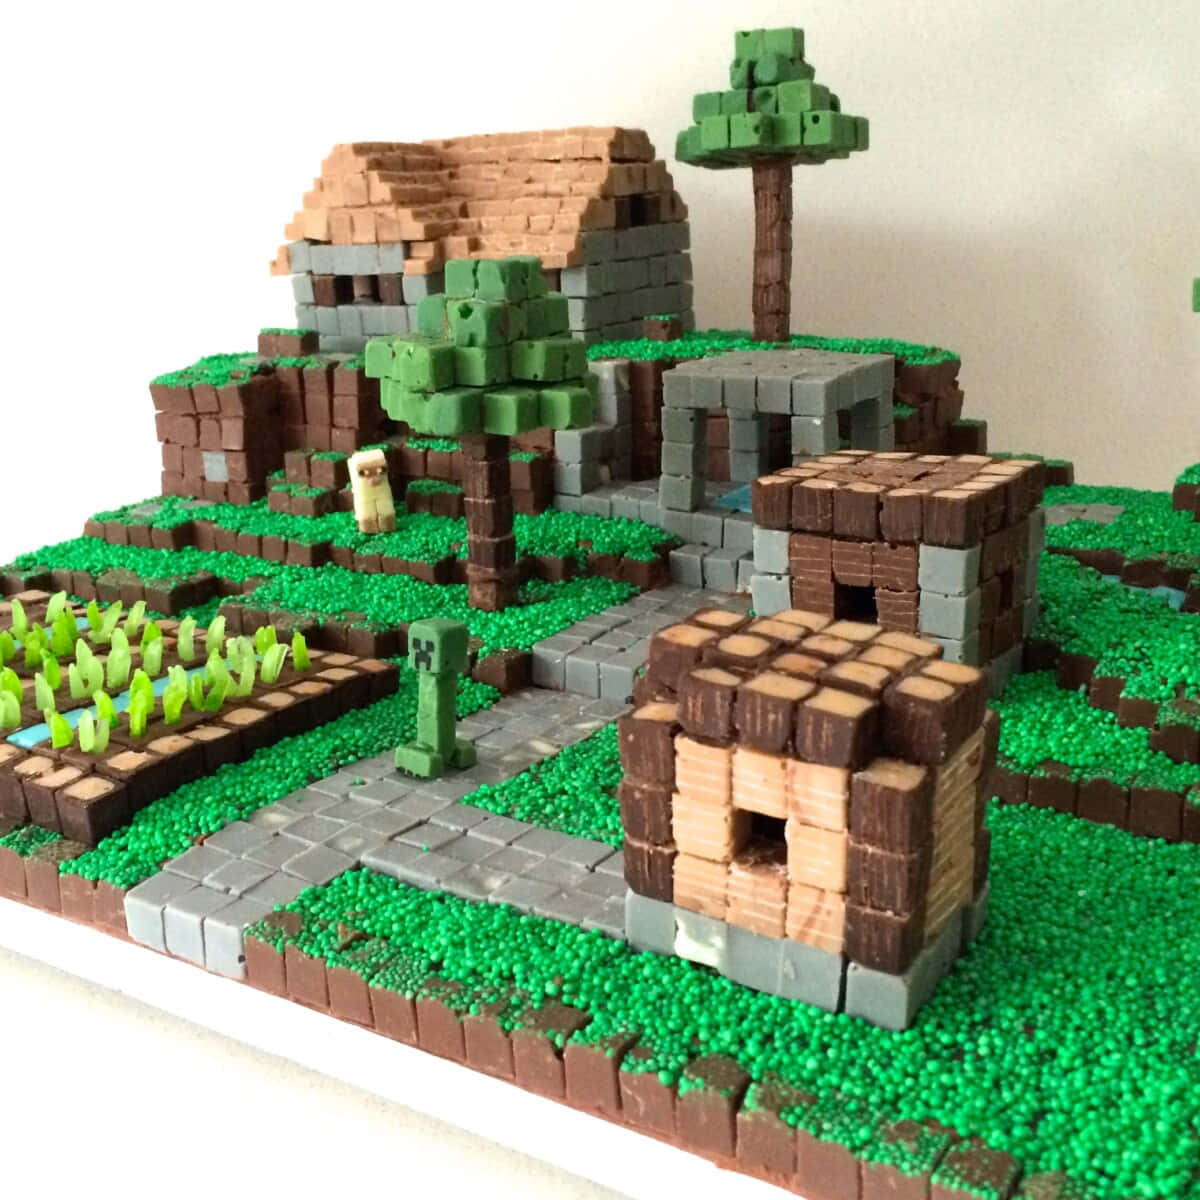 Celebrate With Fun and Delicious Minecraft-Themed Cakes